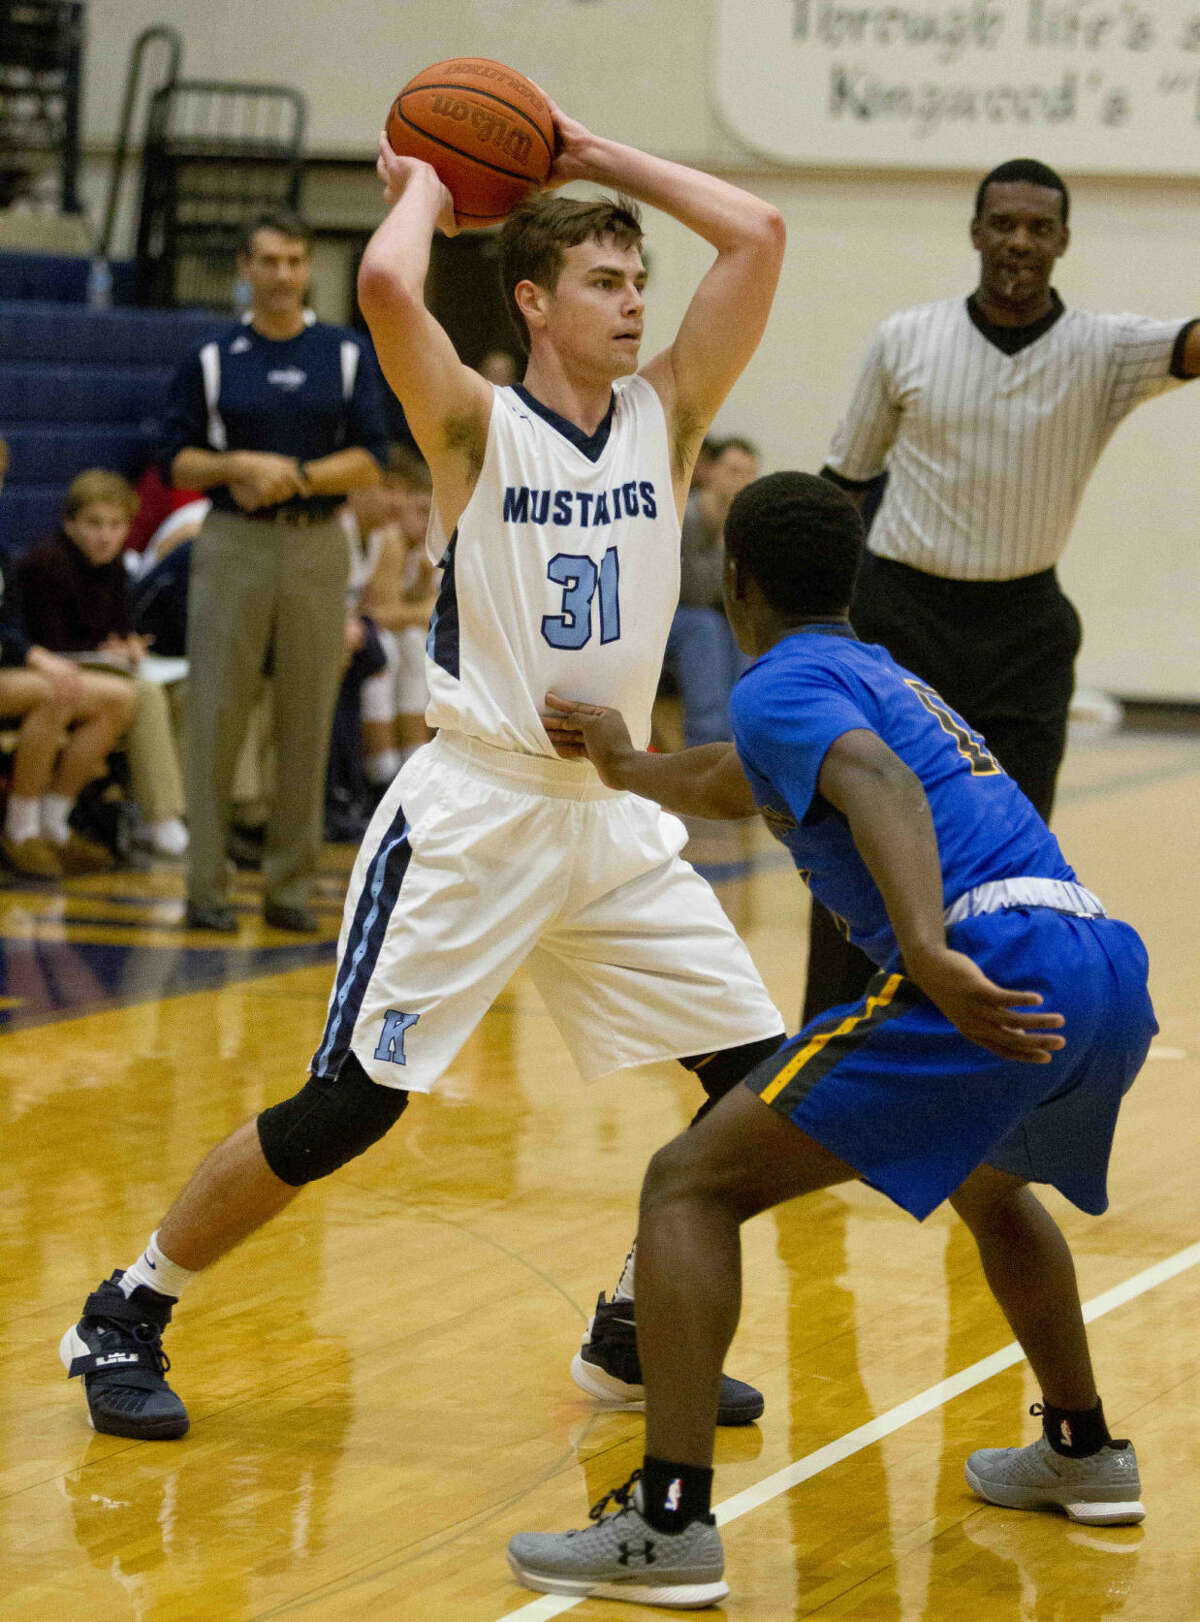 Kingwood guard Mitchell Clouse looks to pass during a basketball game at the Insperity Holiday Classic at Kingwood High School Monday, Dec. 28, 2015. Go to HCNpics.com to purchase this image and view more photos from the tournament.